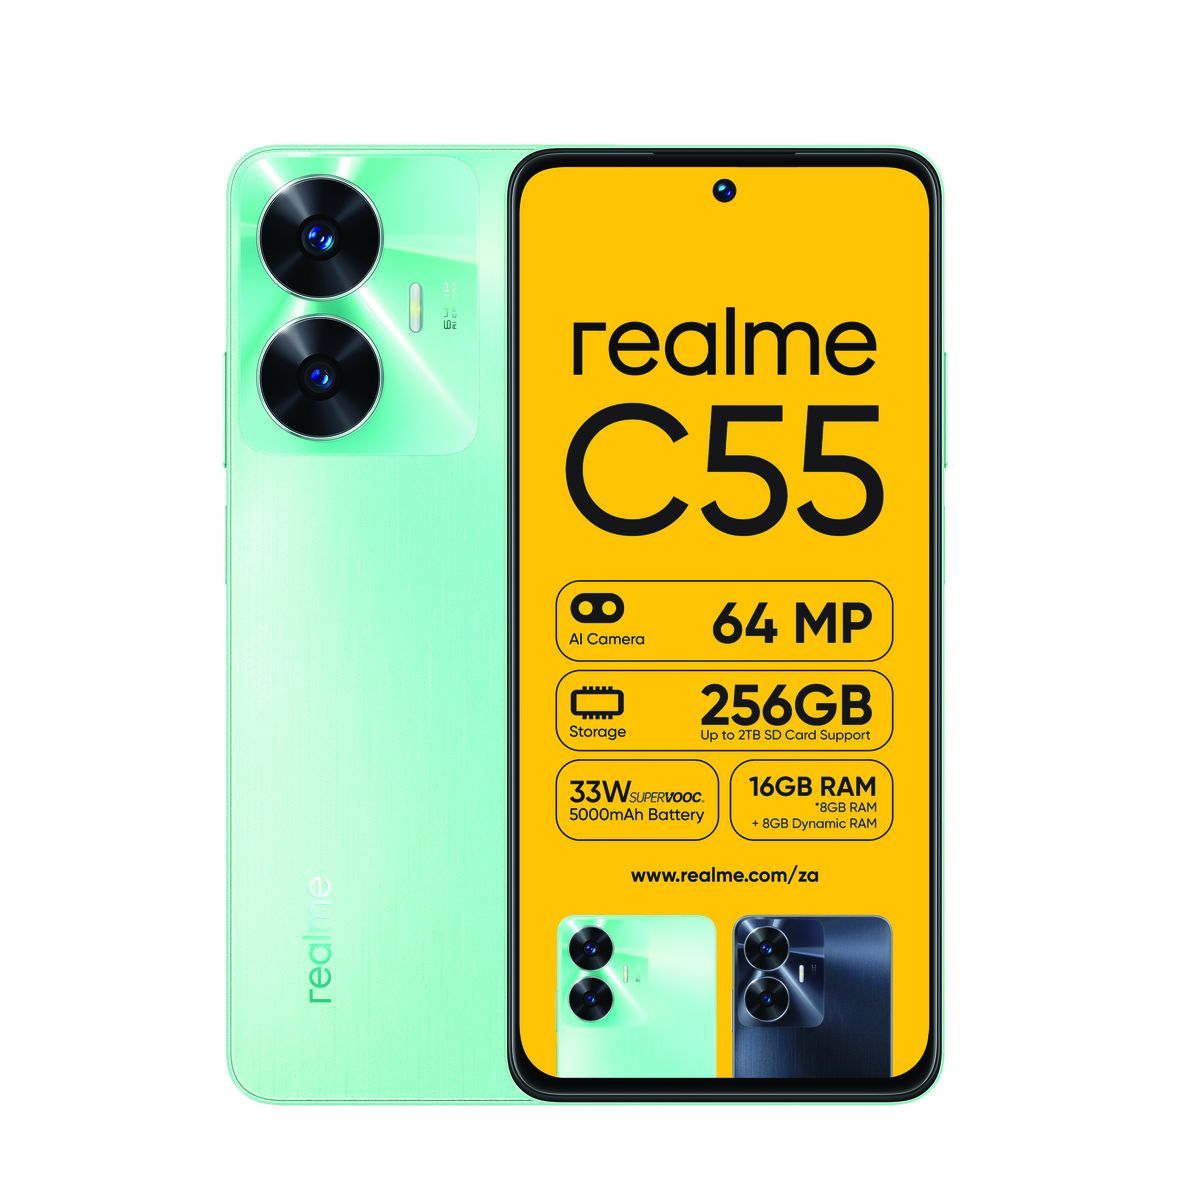 realme C55 Dual SIM 8GB+256GB | 64MP AI Camera | 5000mAh Battery | 6.72  90Hz FHD+ Display | 33W Supervooc Charge | for GSM Carriers only, NOT for